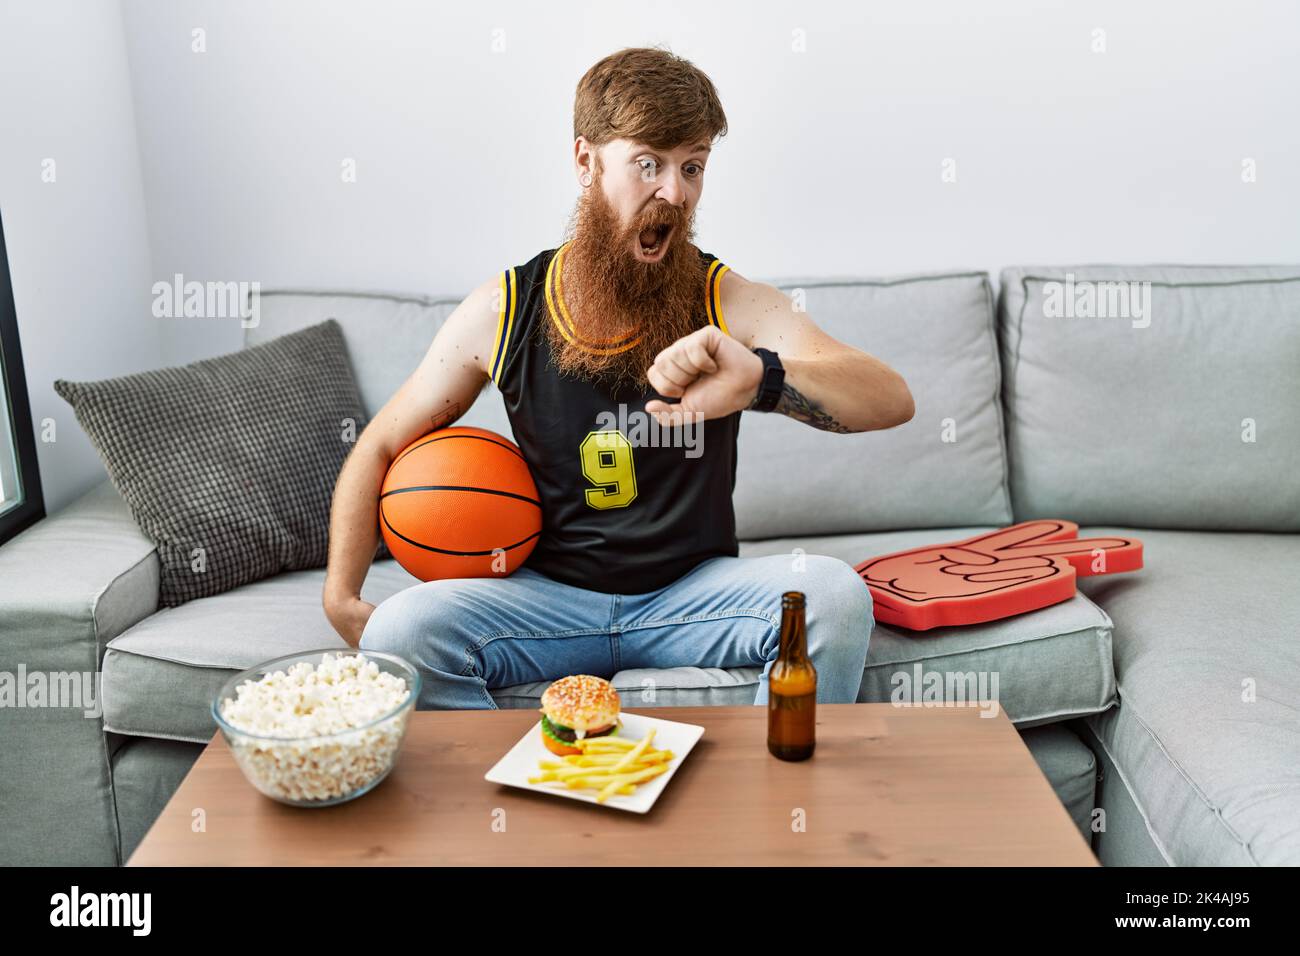 Caucasian man with long beard holding basketball ball cheering tv game looking at the watch time worried, afraid of getting late Stock Photo